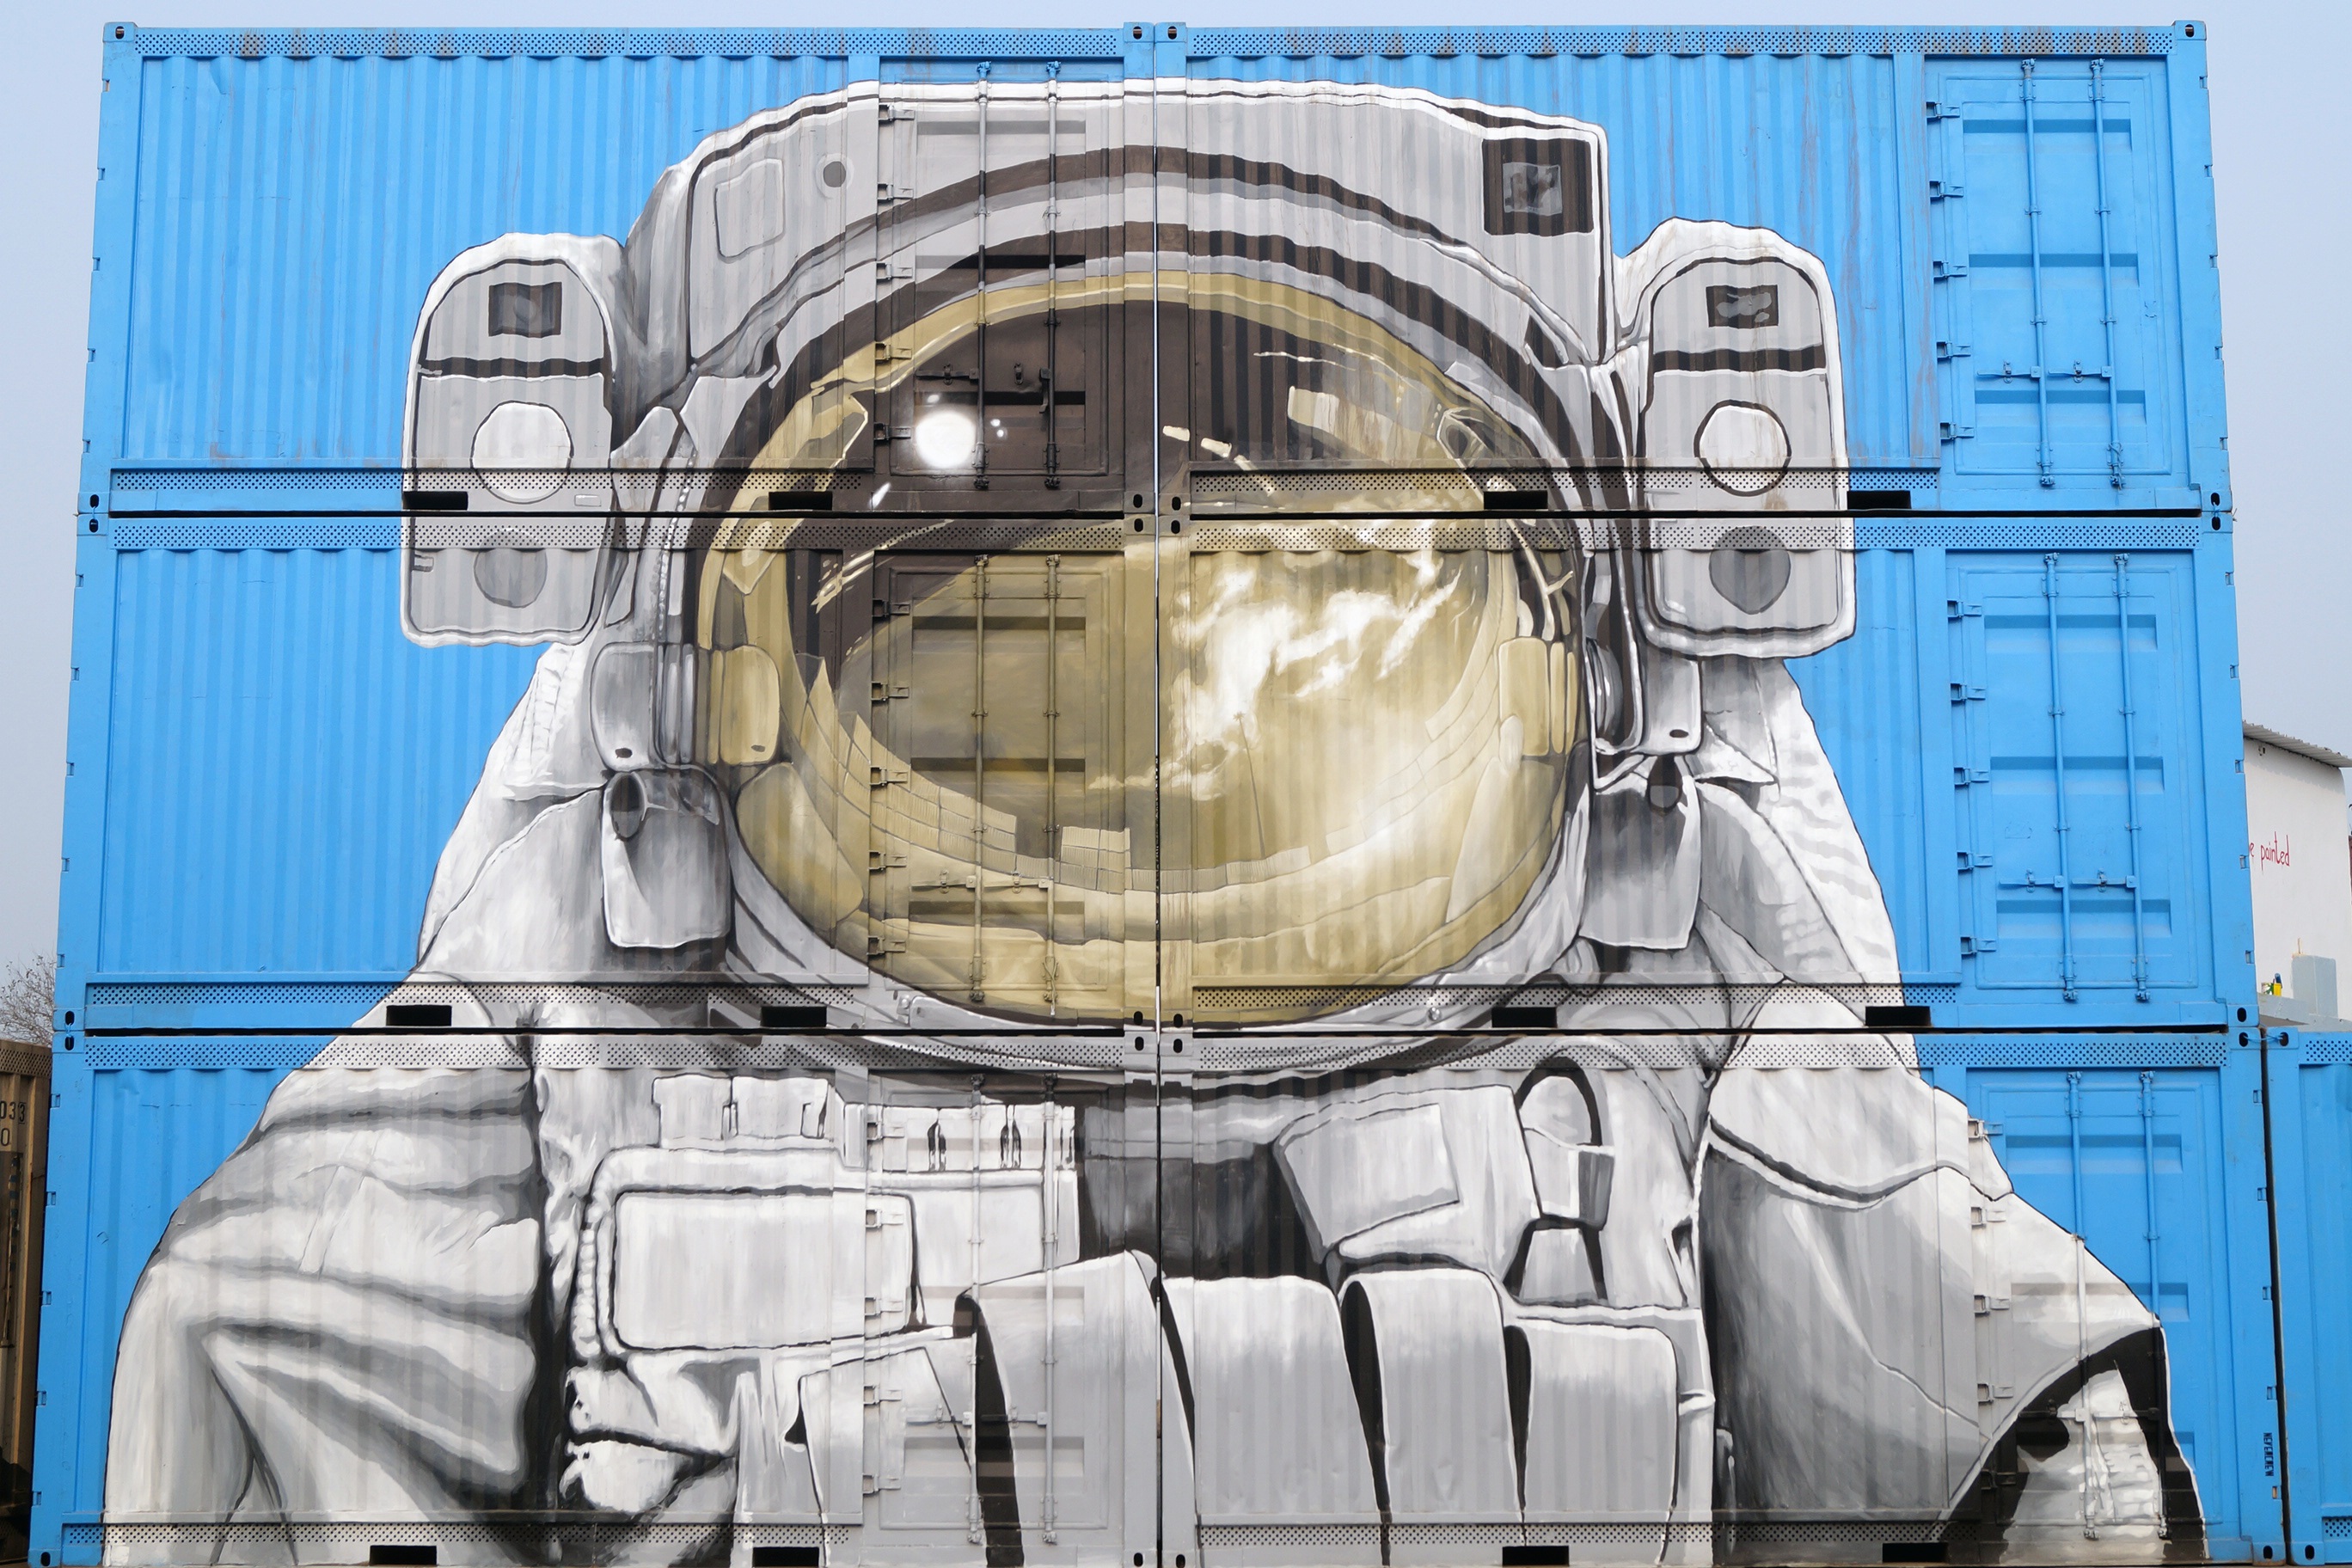 Astronaut Graffiti on a shipping container in New Delhi by Nevercrew by ankitasiddiqui